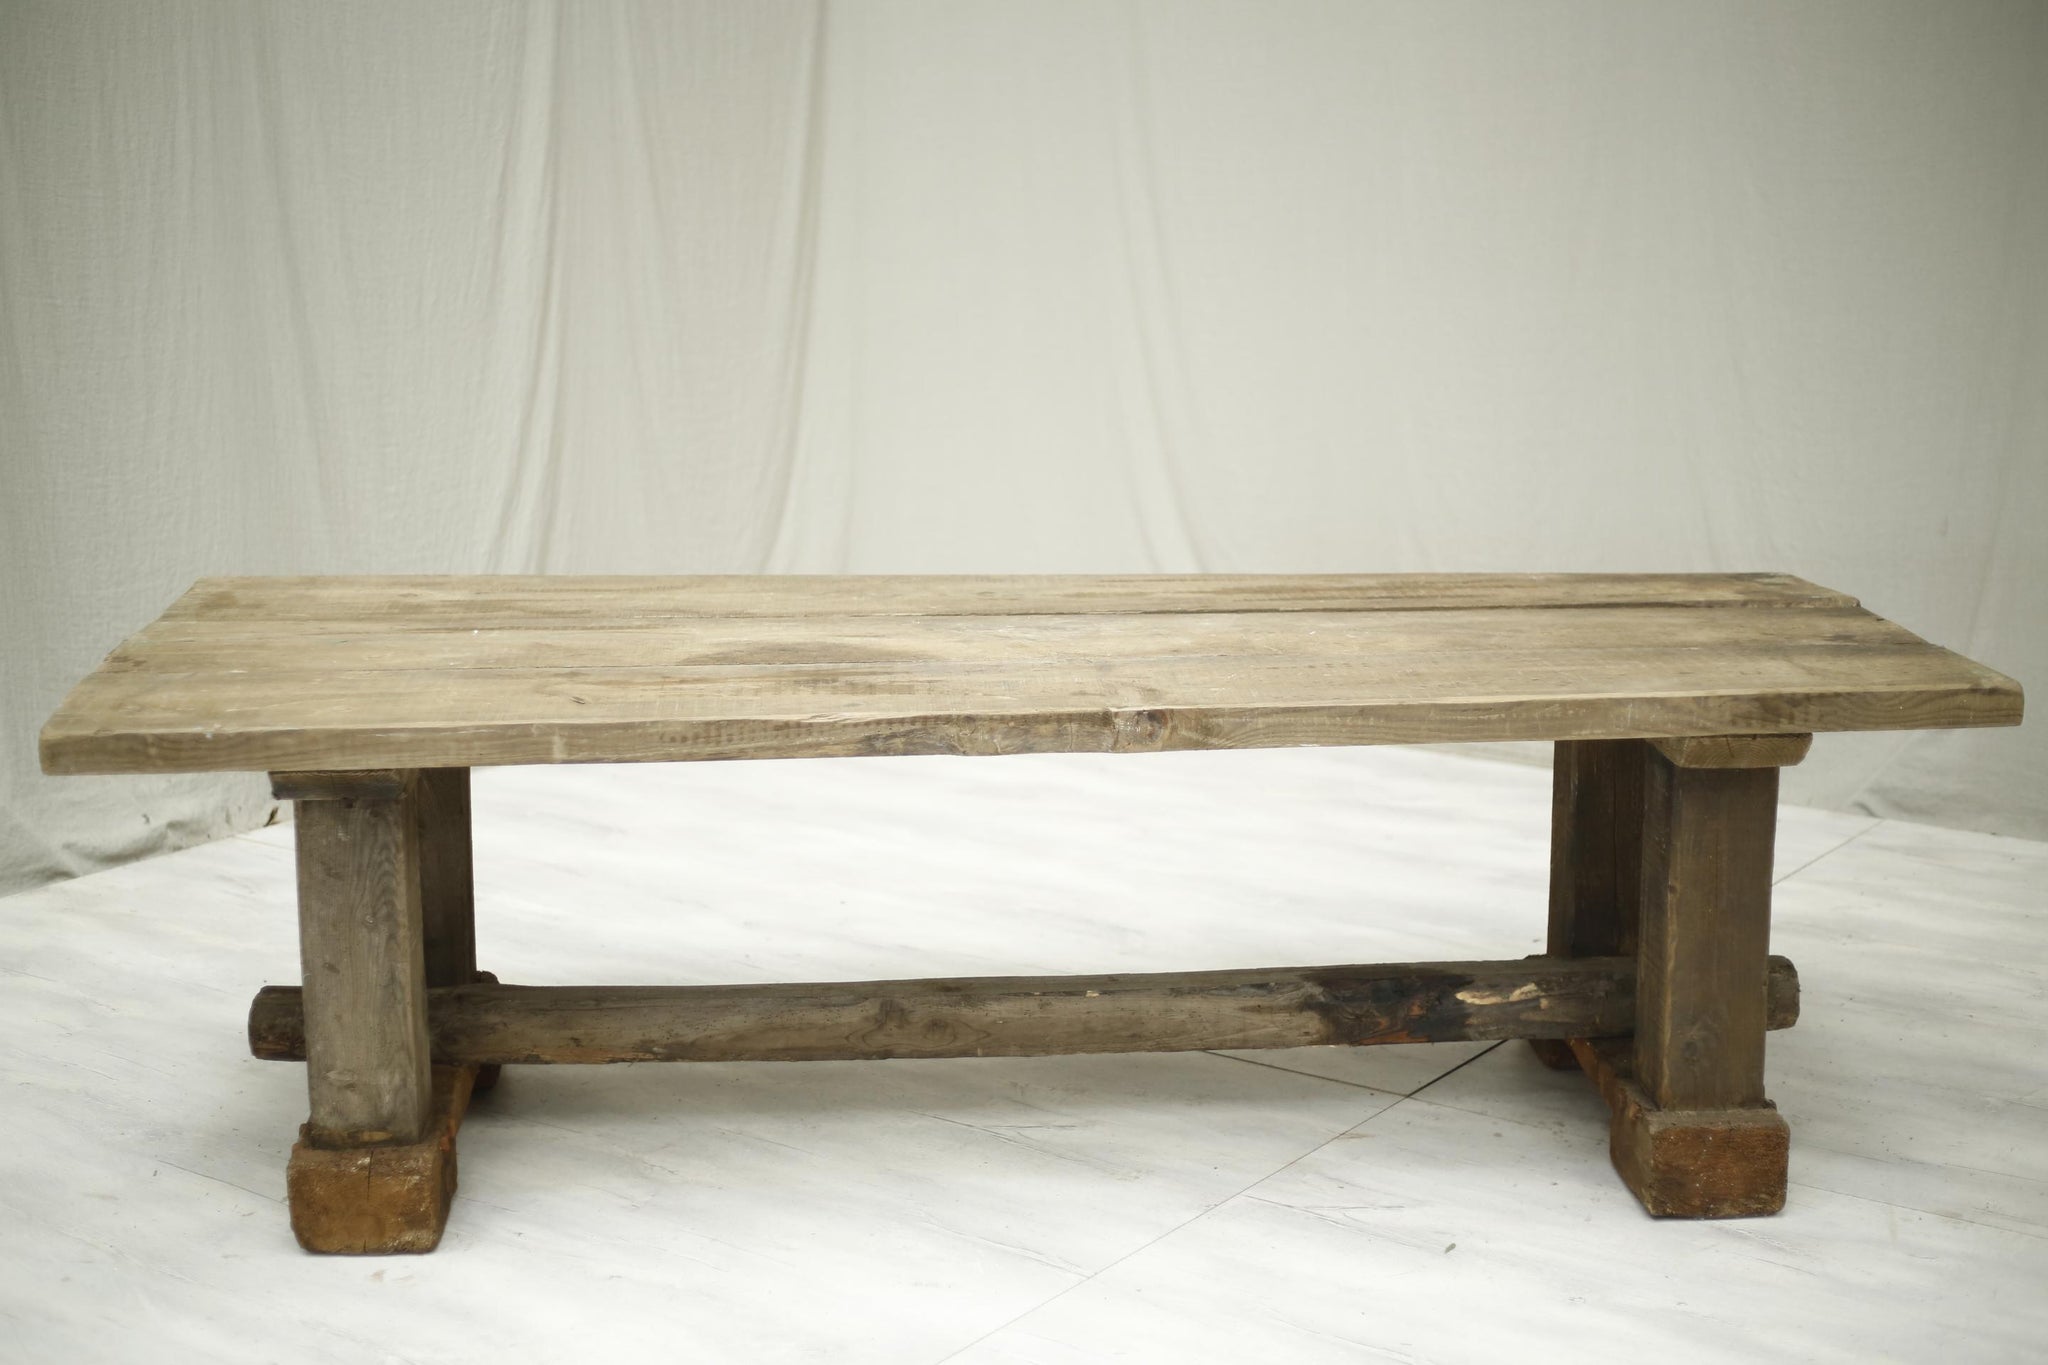 Antique Early 20th century Large weathered pine garden table